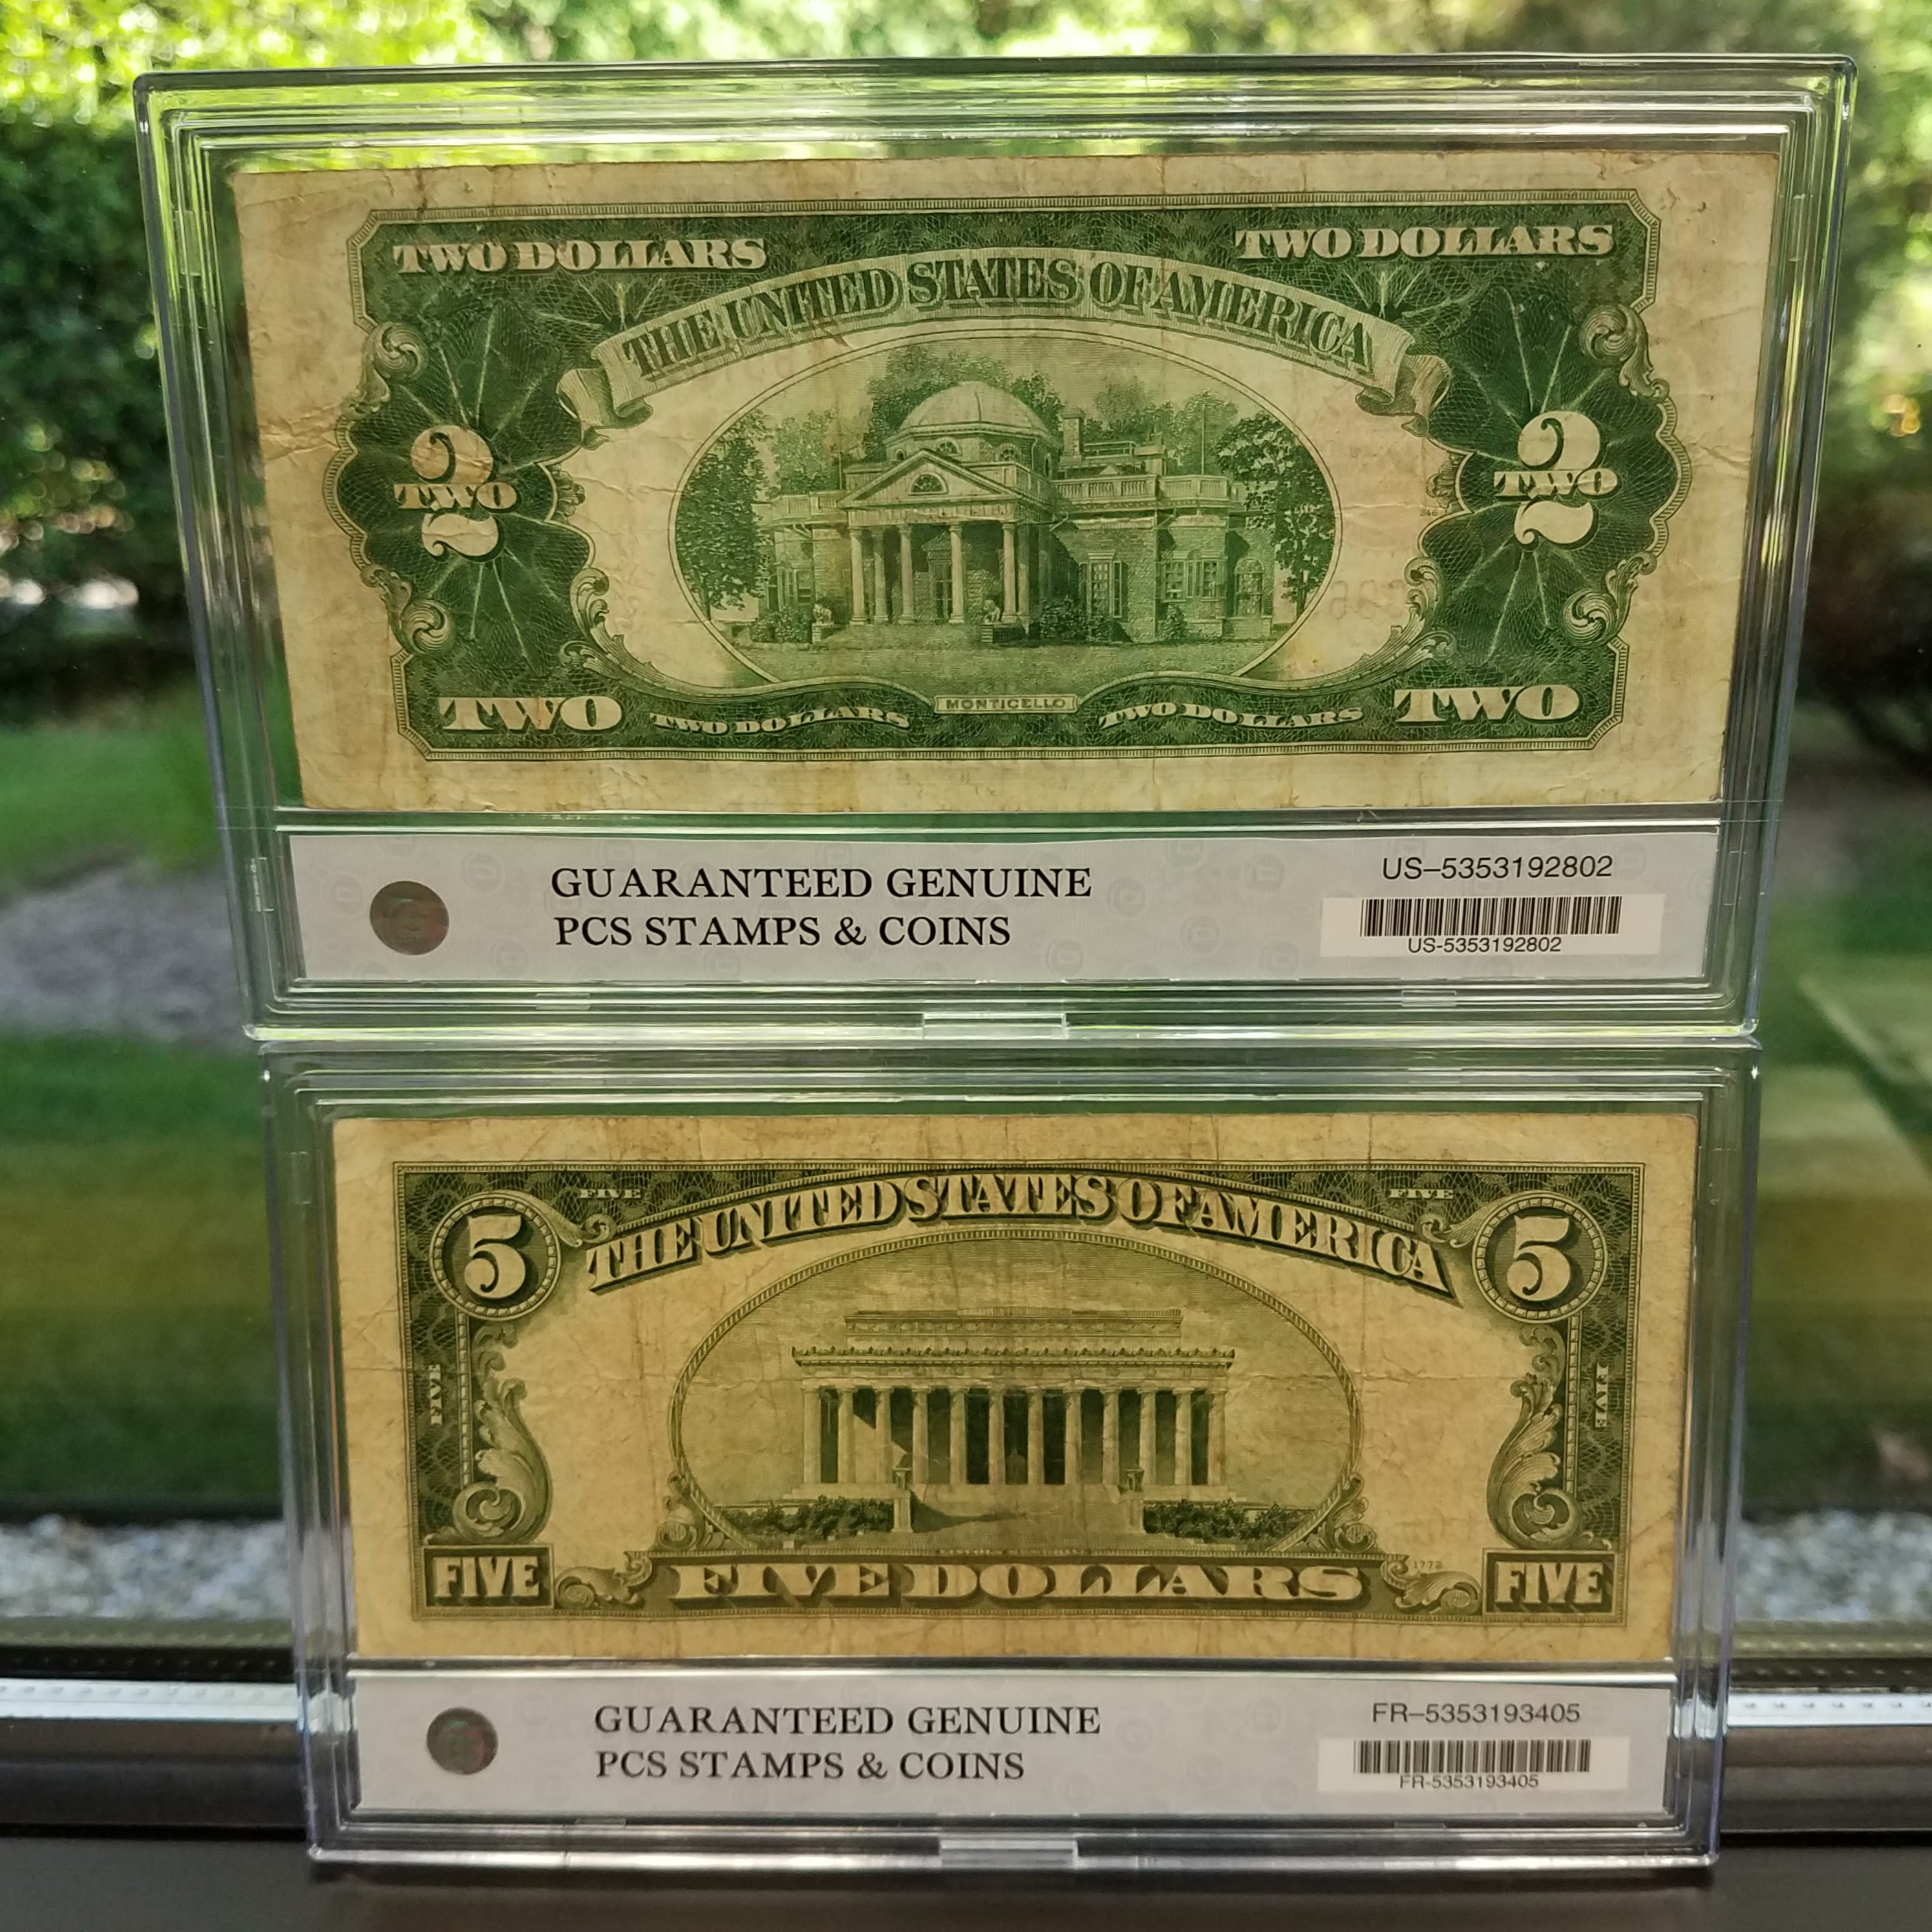 The Complete Collection of Small Size US Currency CUT 1